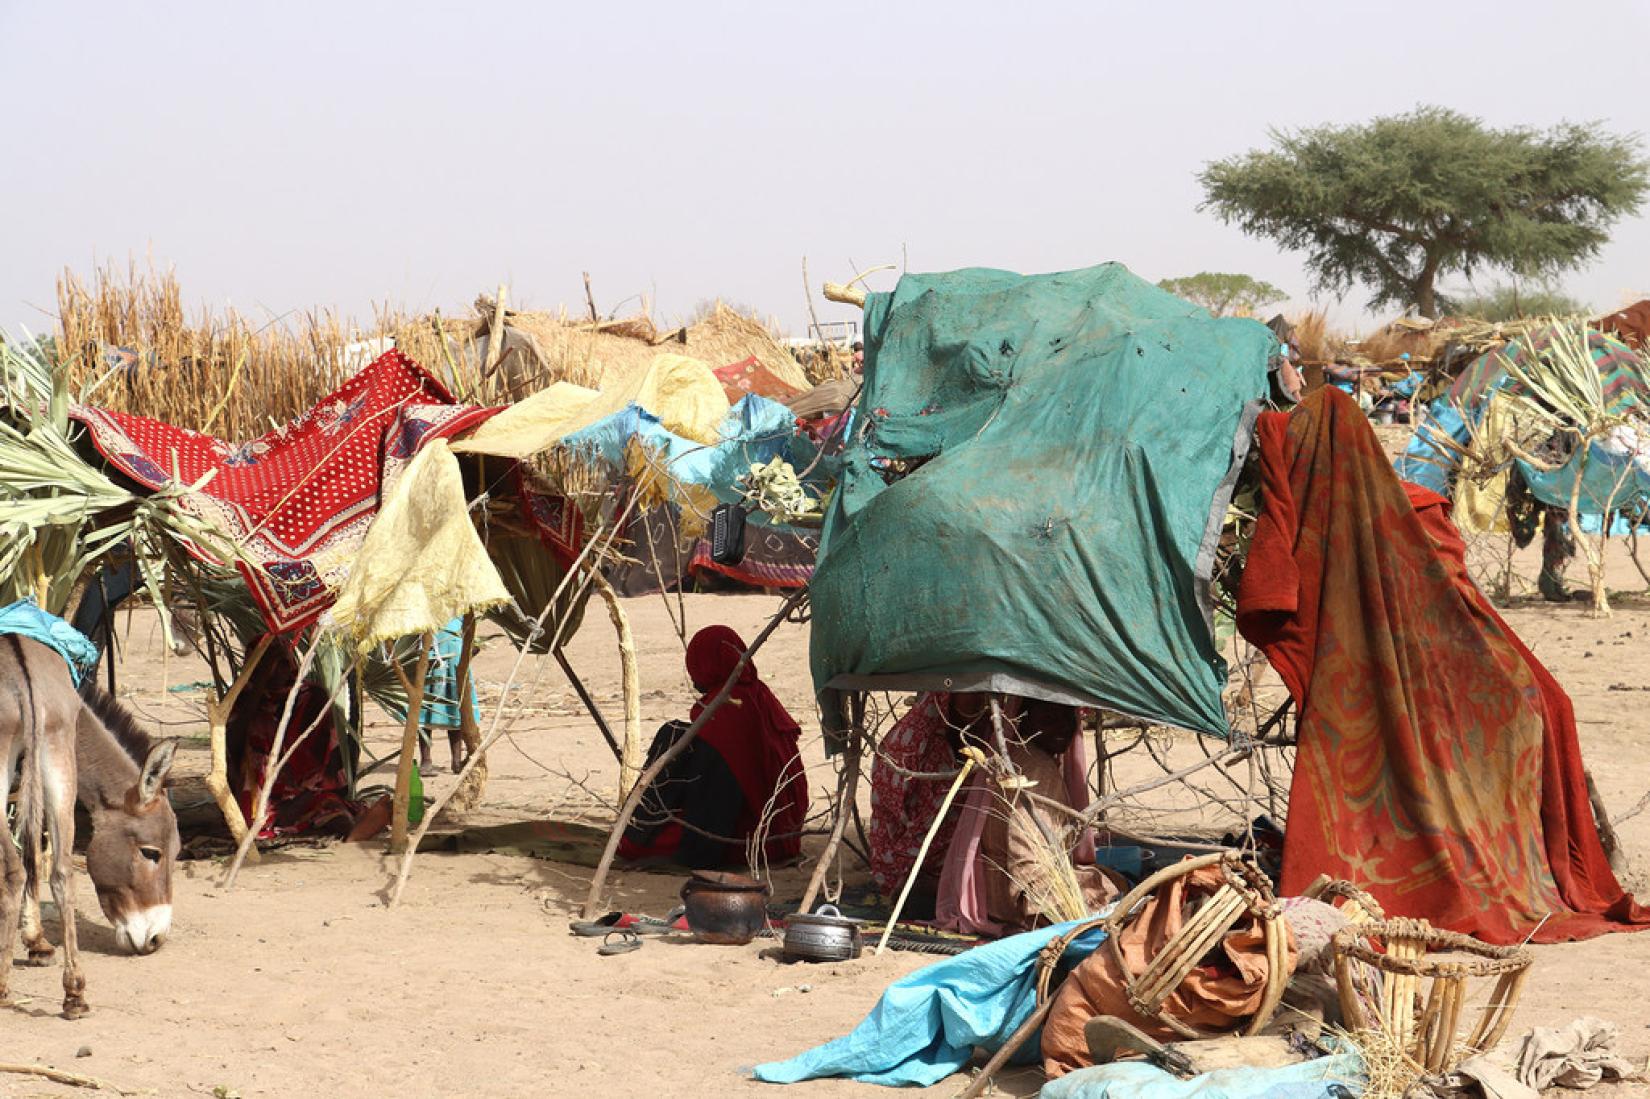 Thousands of refugees are crossing the border into Chad fleeing violence in Sudan.